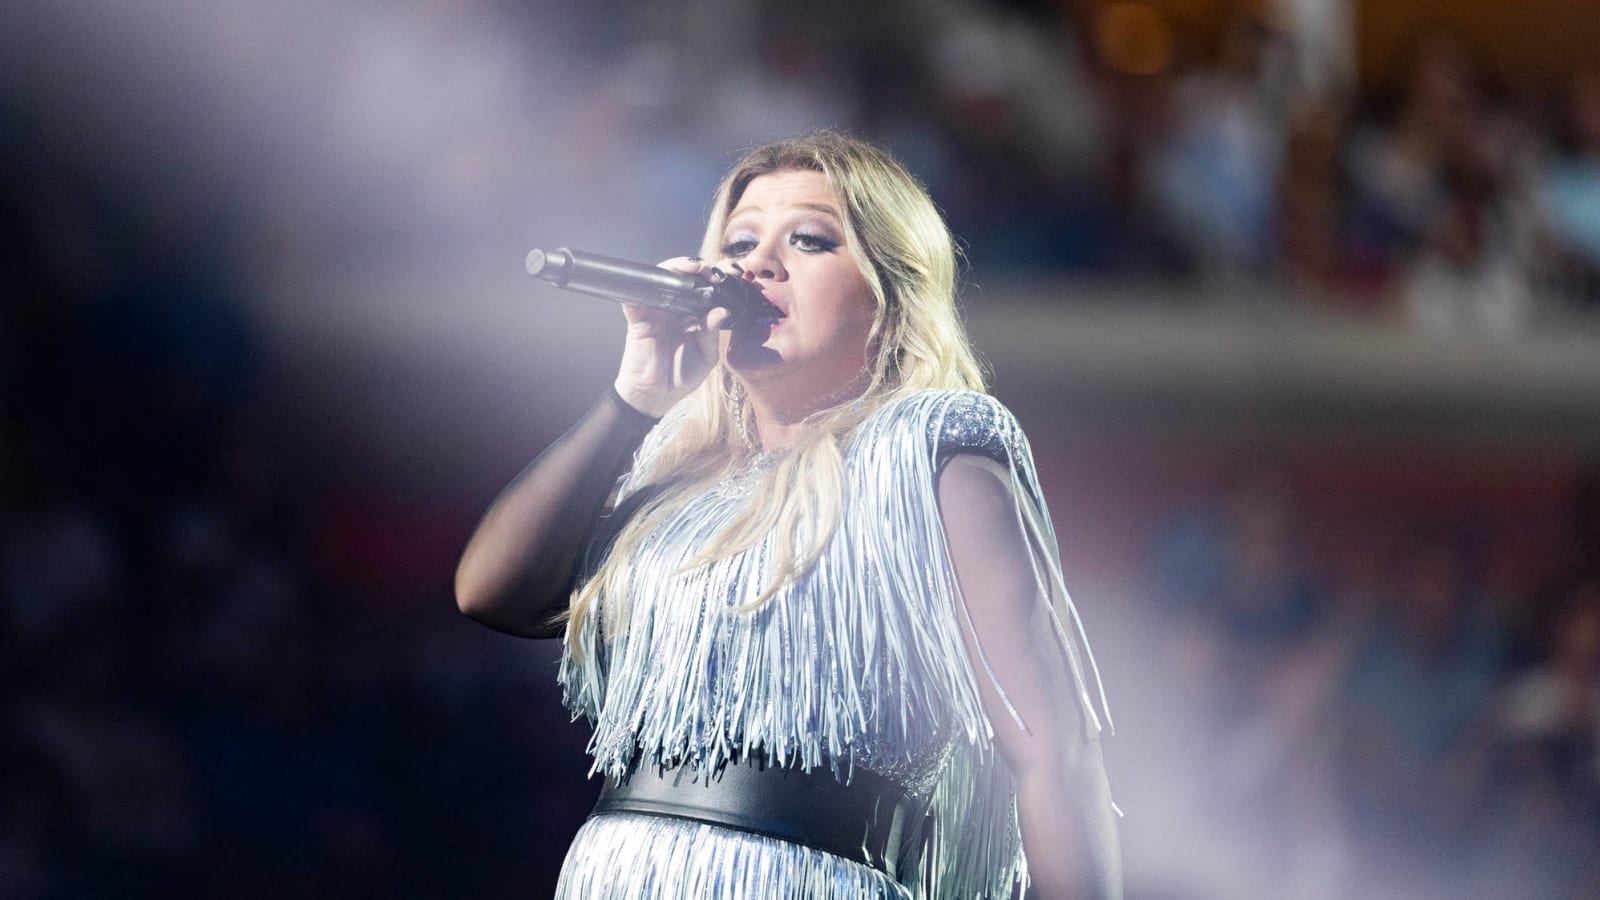 Kelly Clarkson performs stirring 'The Dance' tribute for Garth Brooks at Kennedy Center Honors